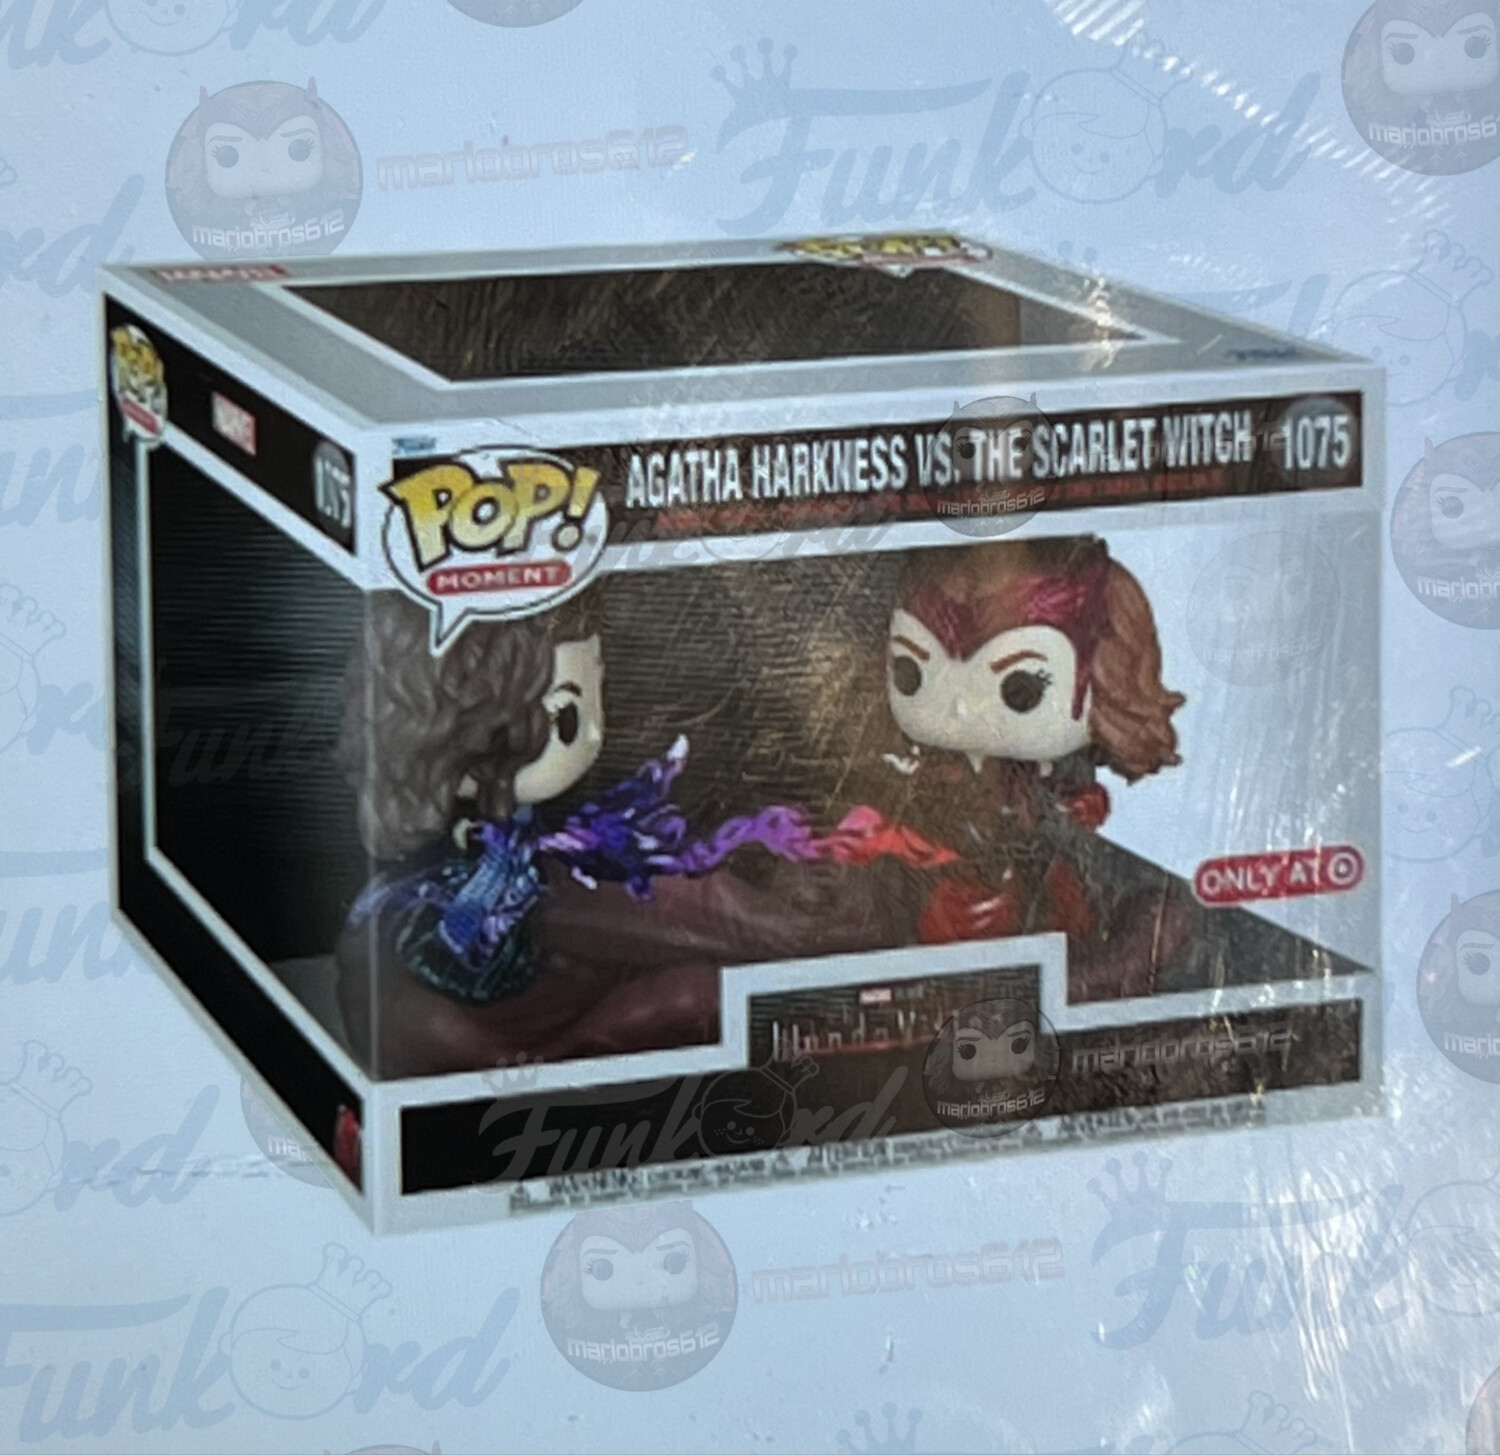 Pre-orden Funko Moment. Agatha Harkness vs The Scarlet Witch Exclusivo de Target